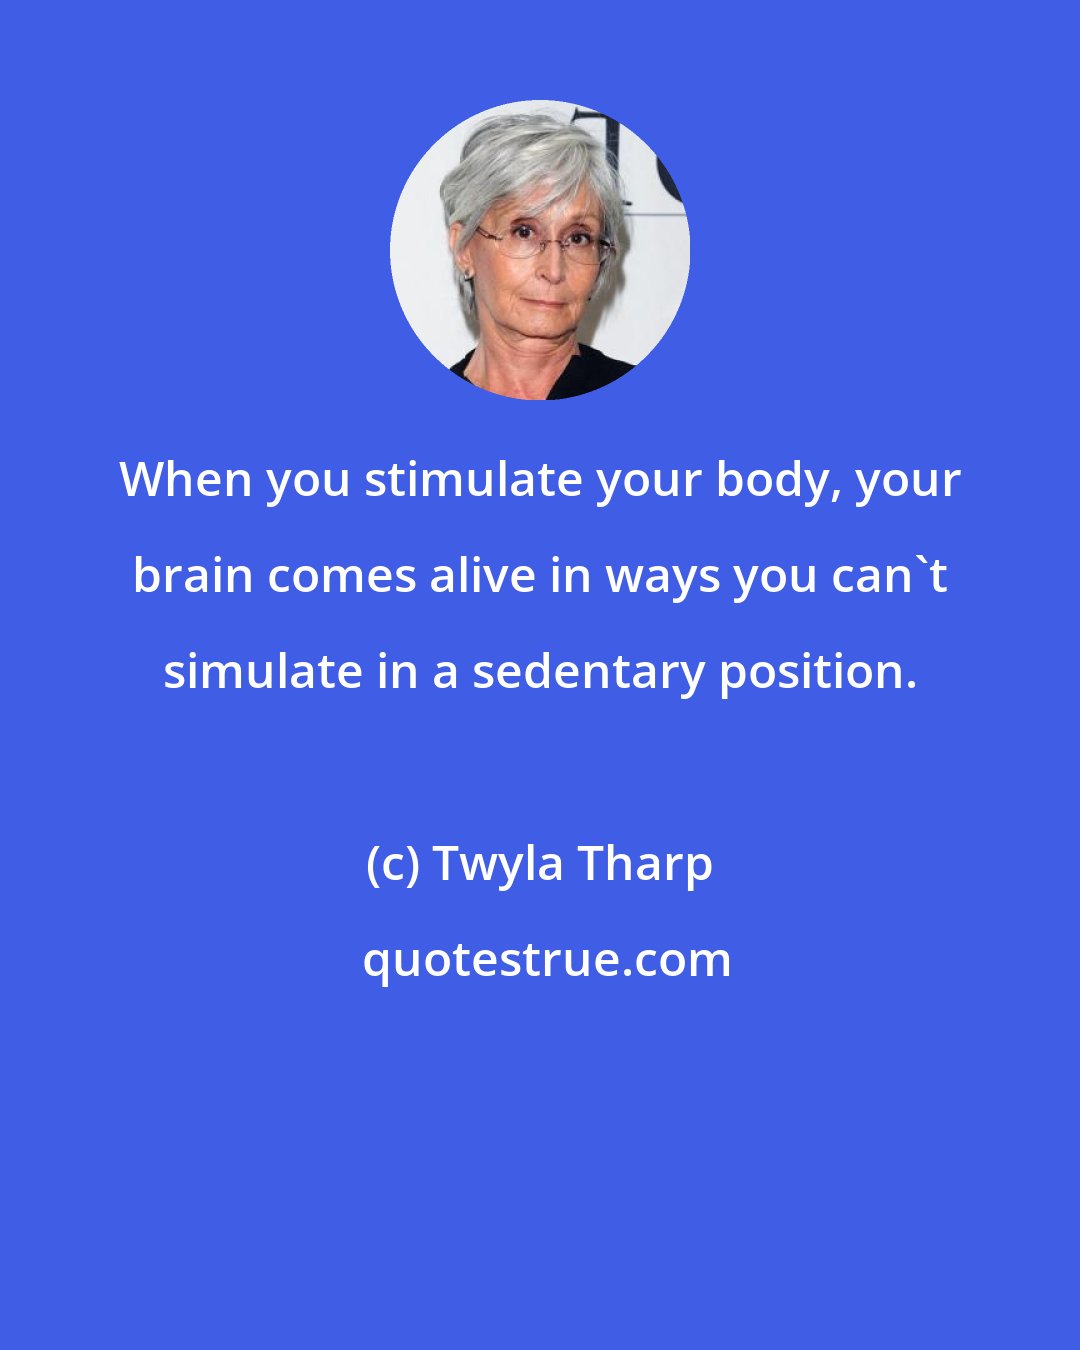 Twyla Tharp: When you stimulate your body, your brain comes alive in ways you can't simulate in a sedentary position.